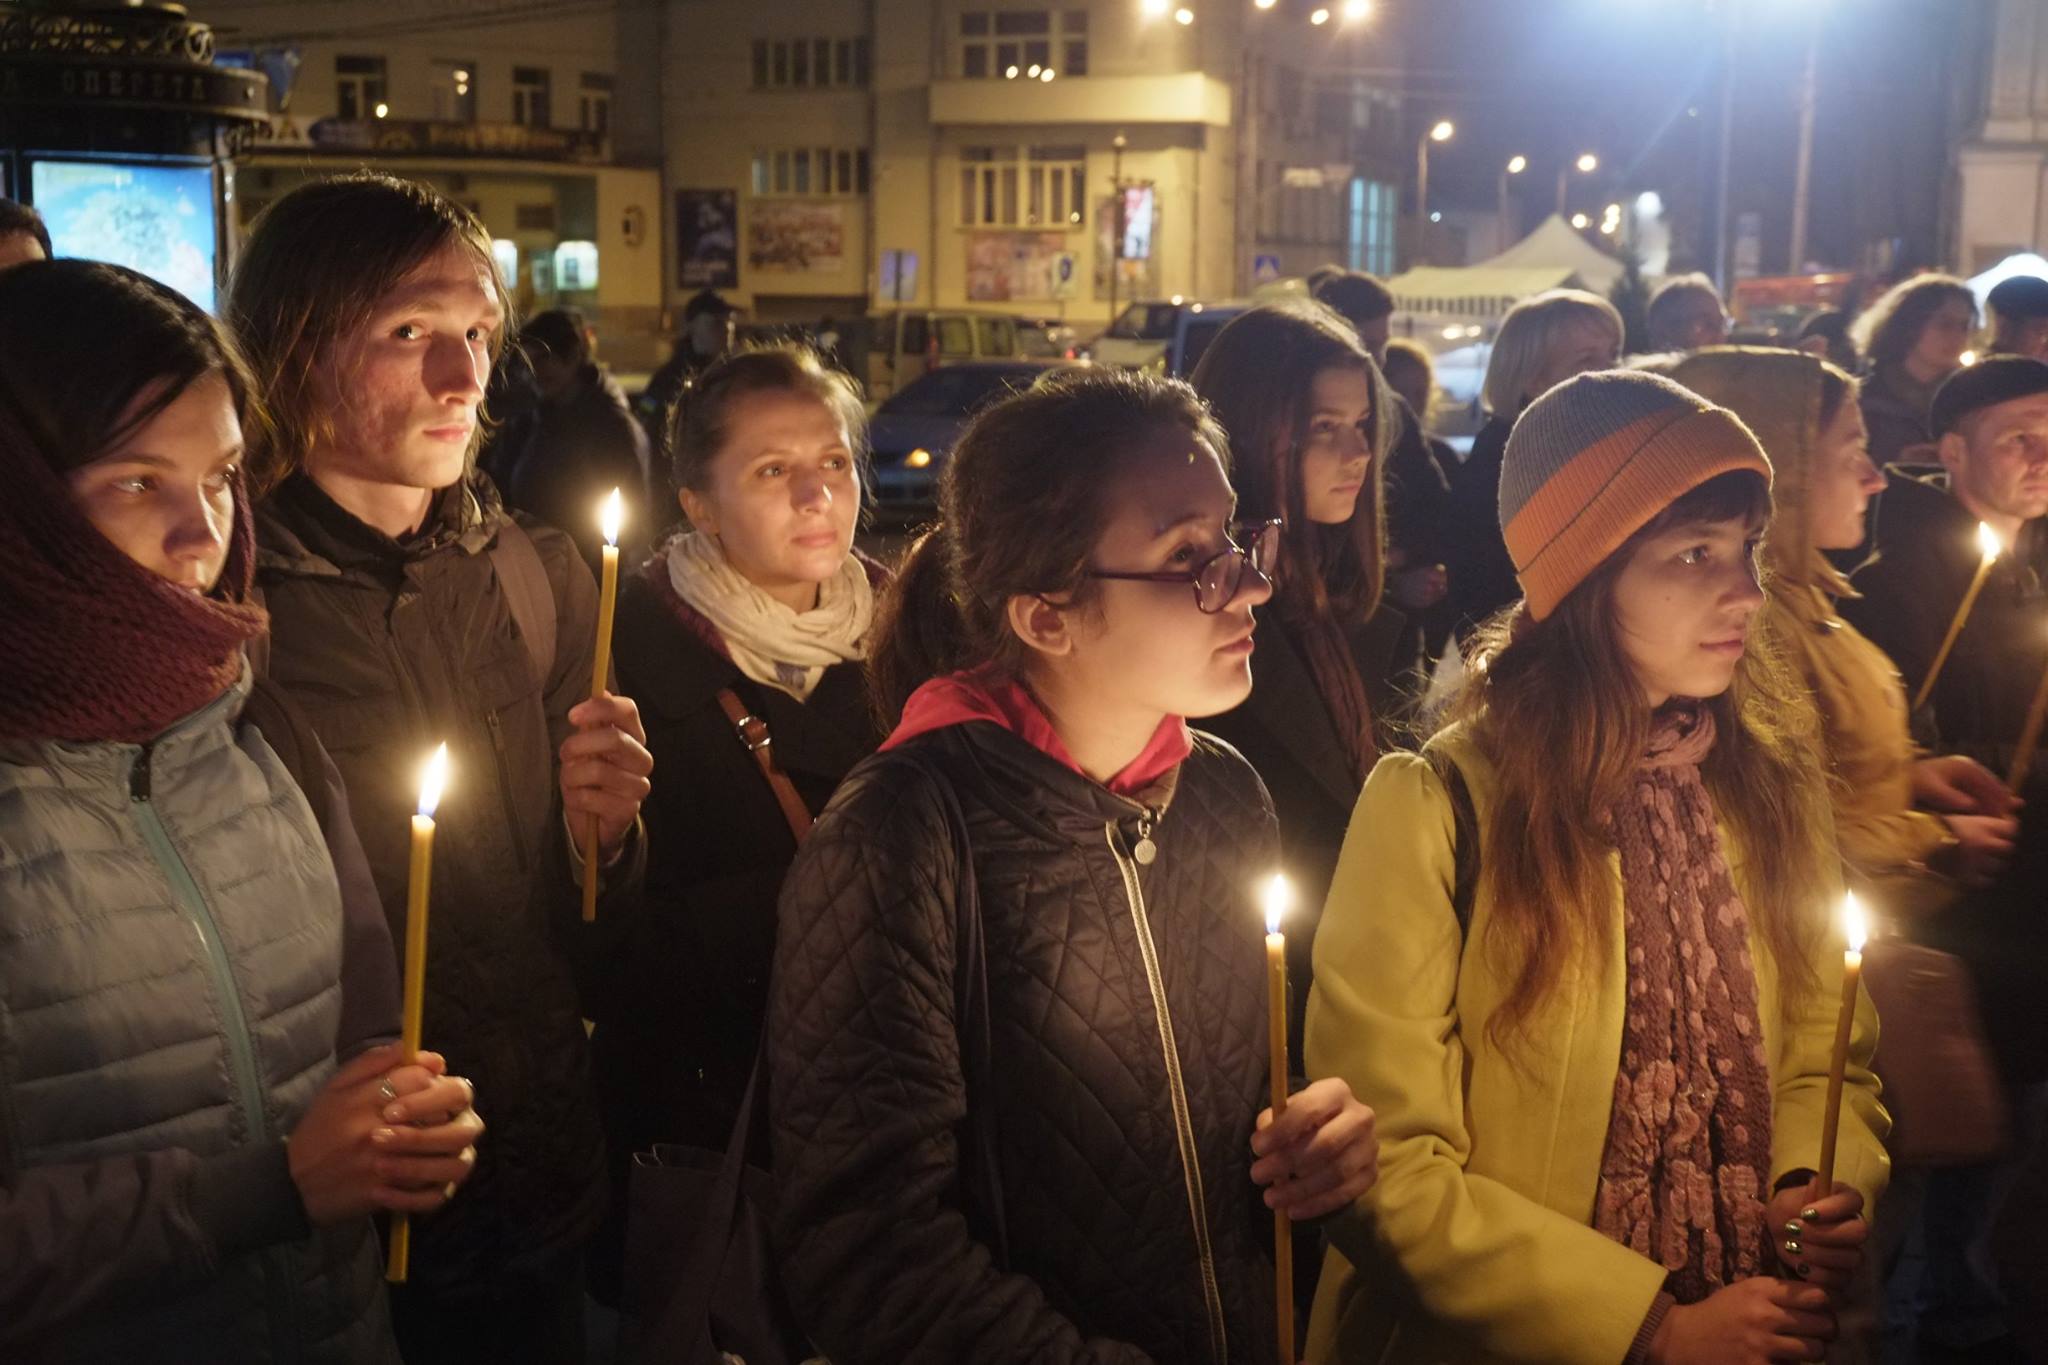 Kyiv honors memory of 34,000 killed in first days of Holocaust in Babi Yar ~~